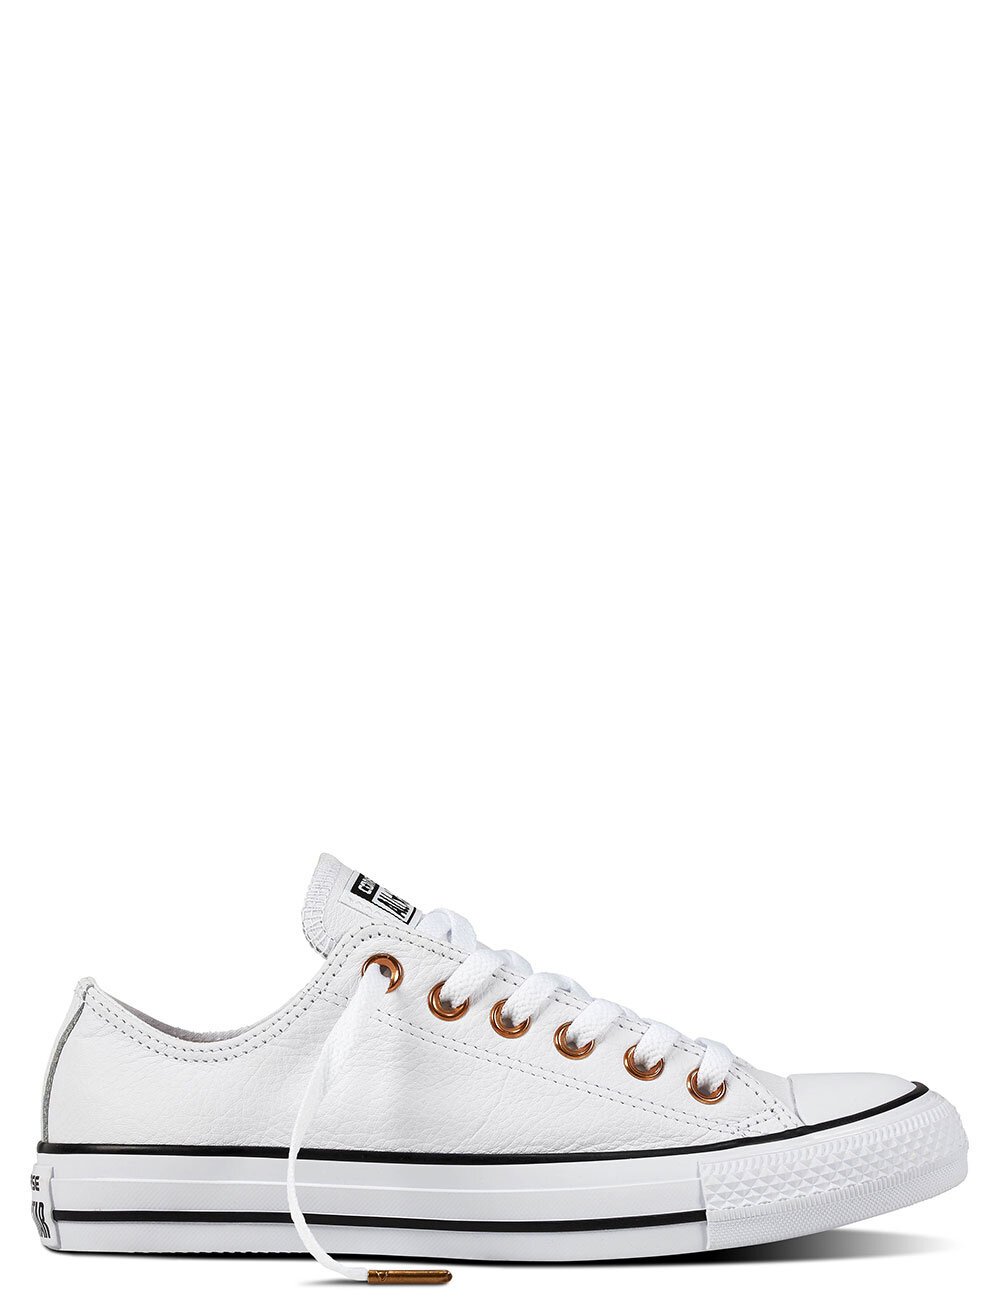 white leather converse nz